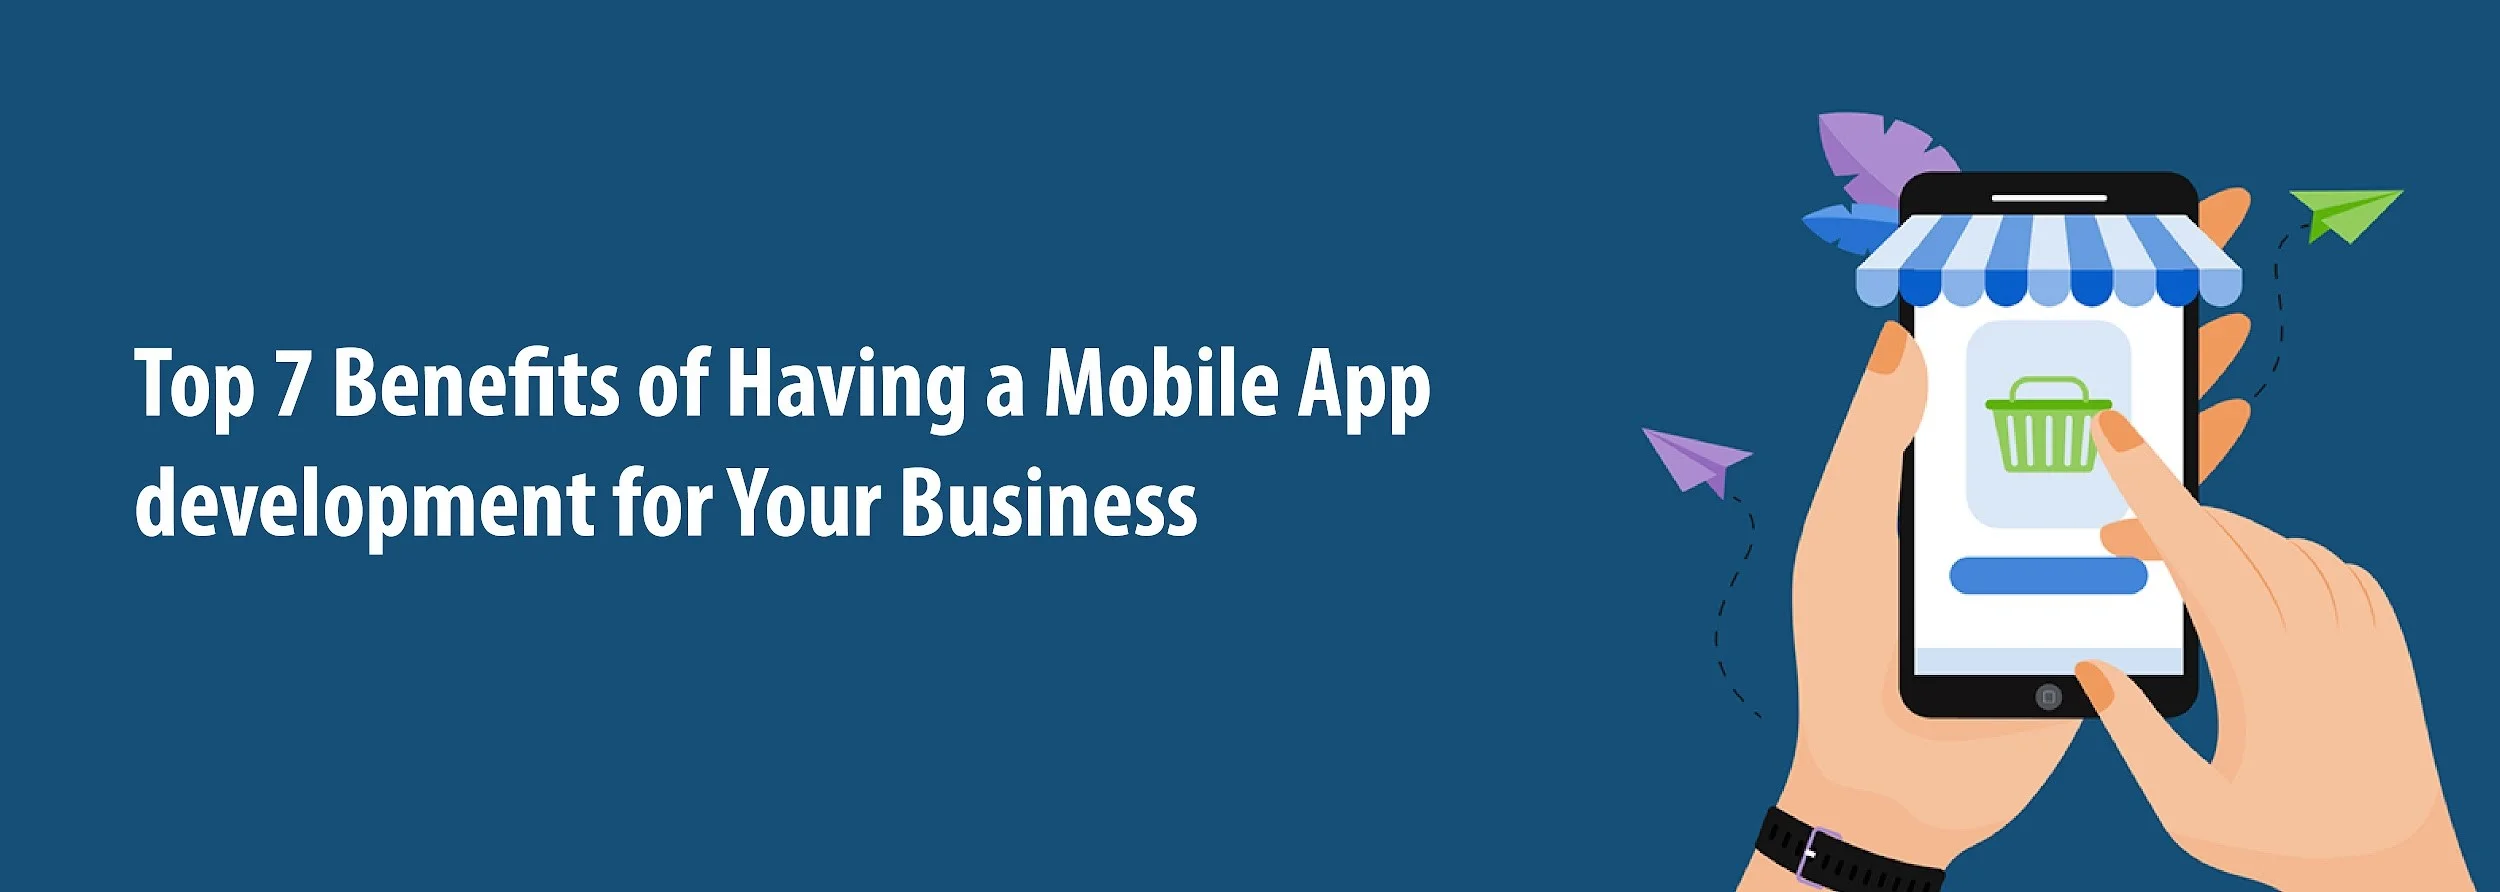 Top 7 Benefits of Having a Mobile App development for Your Business